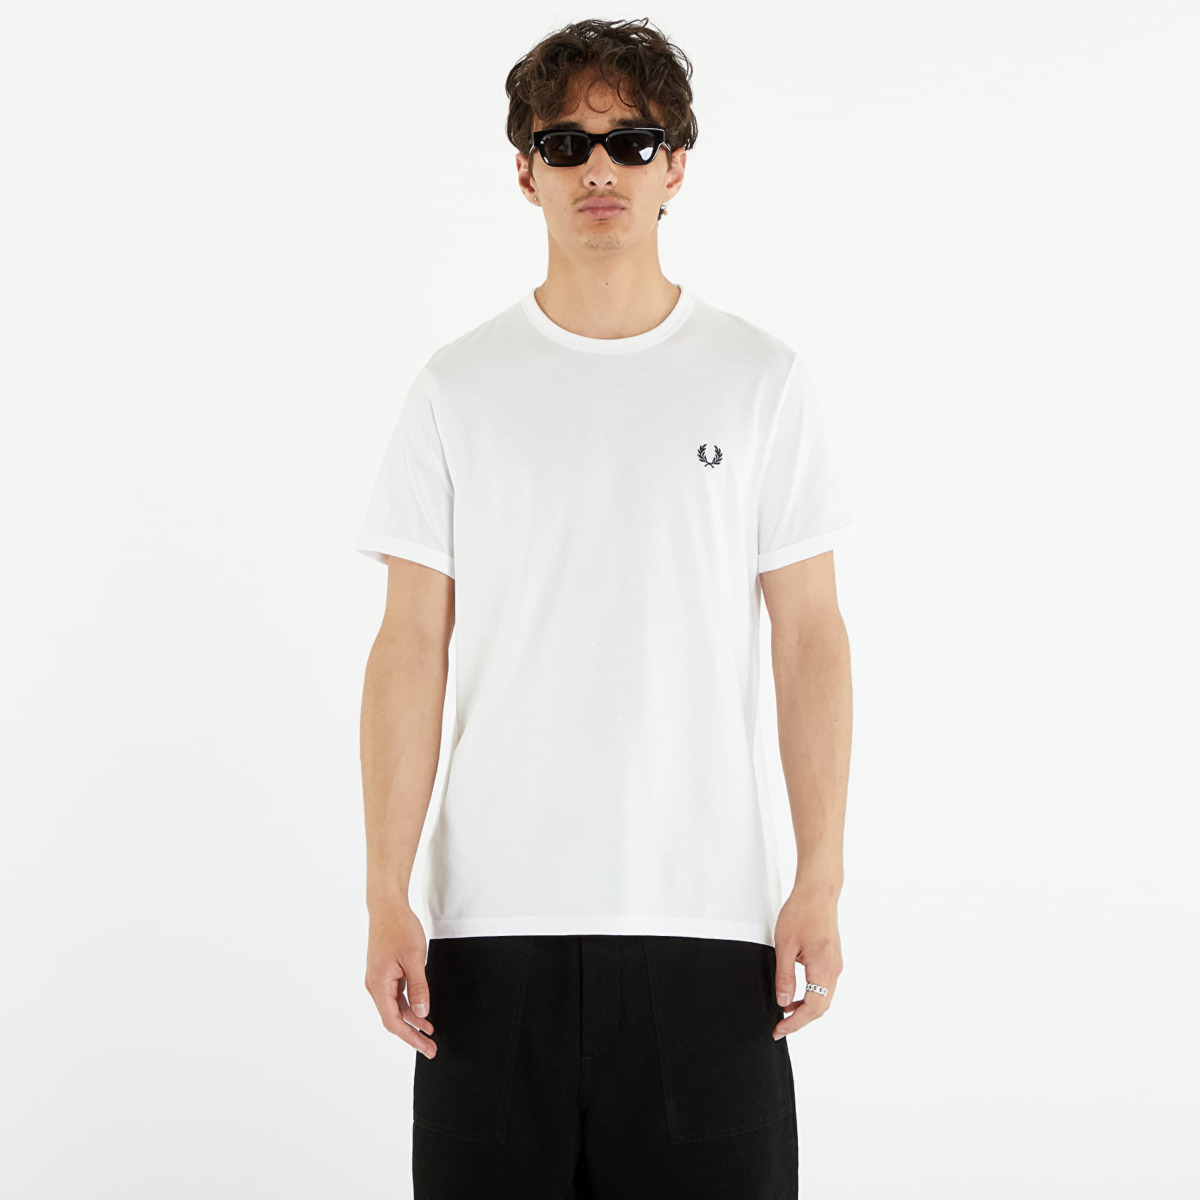 Fred Perry Men's Ringer T-Shirt in White from Footshop GOOFASH